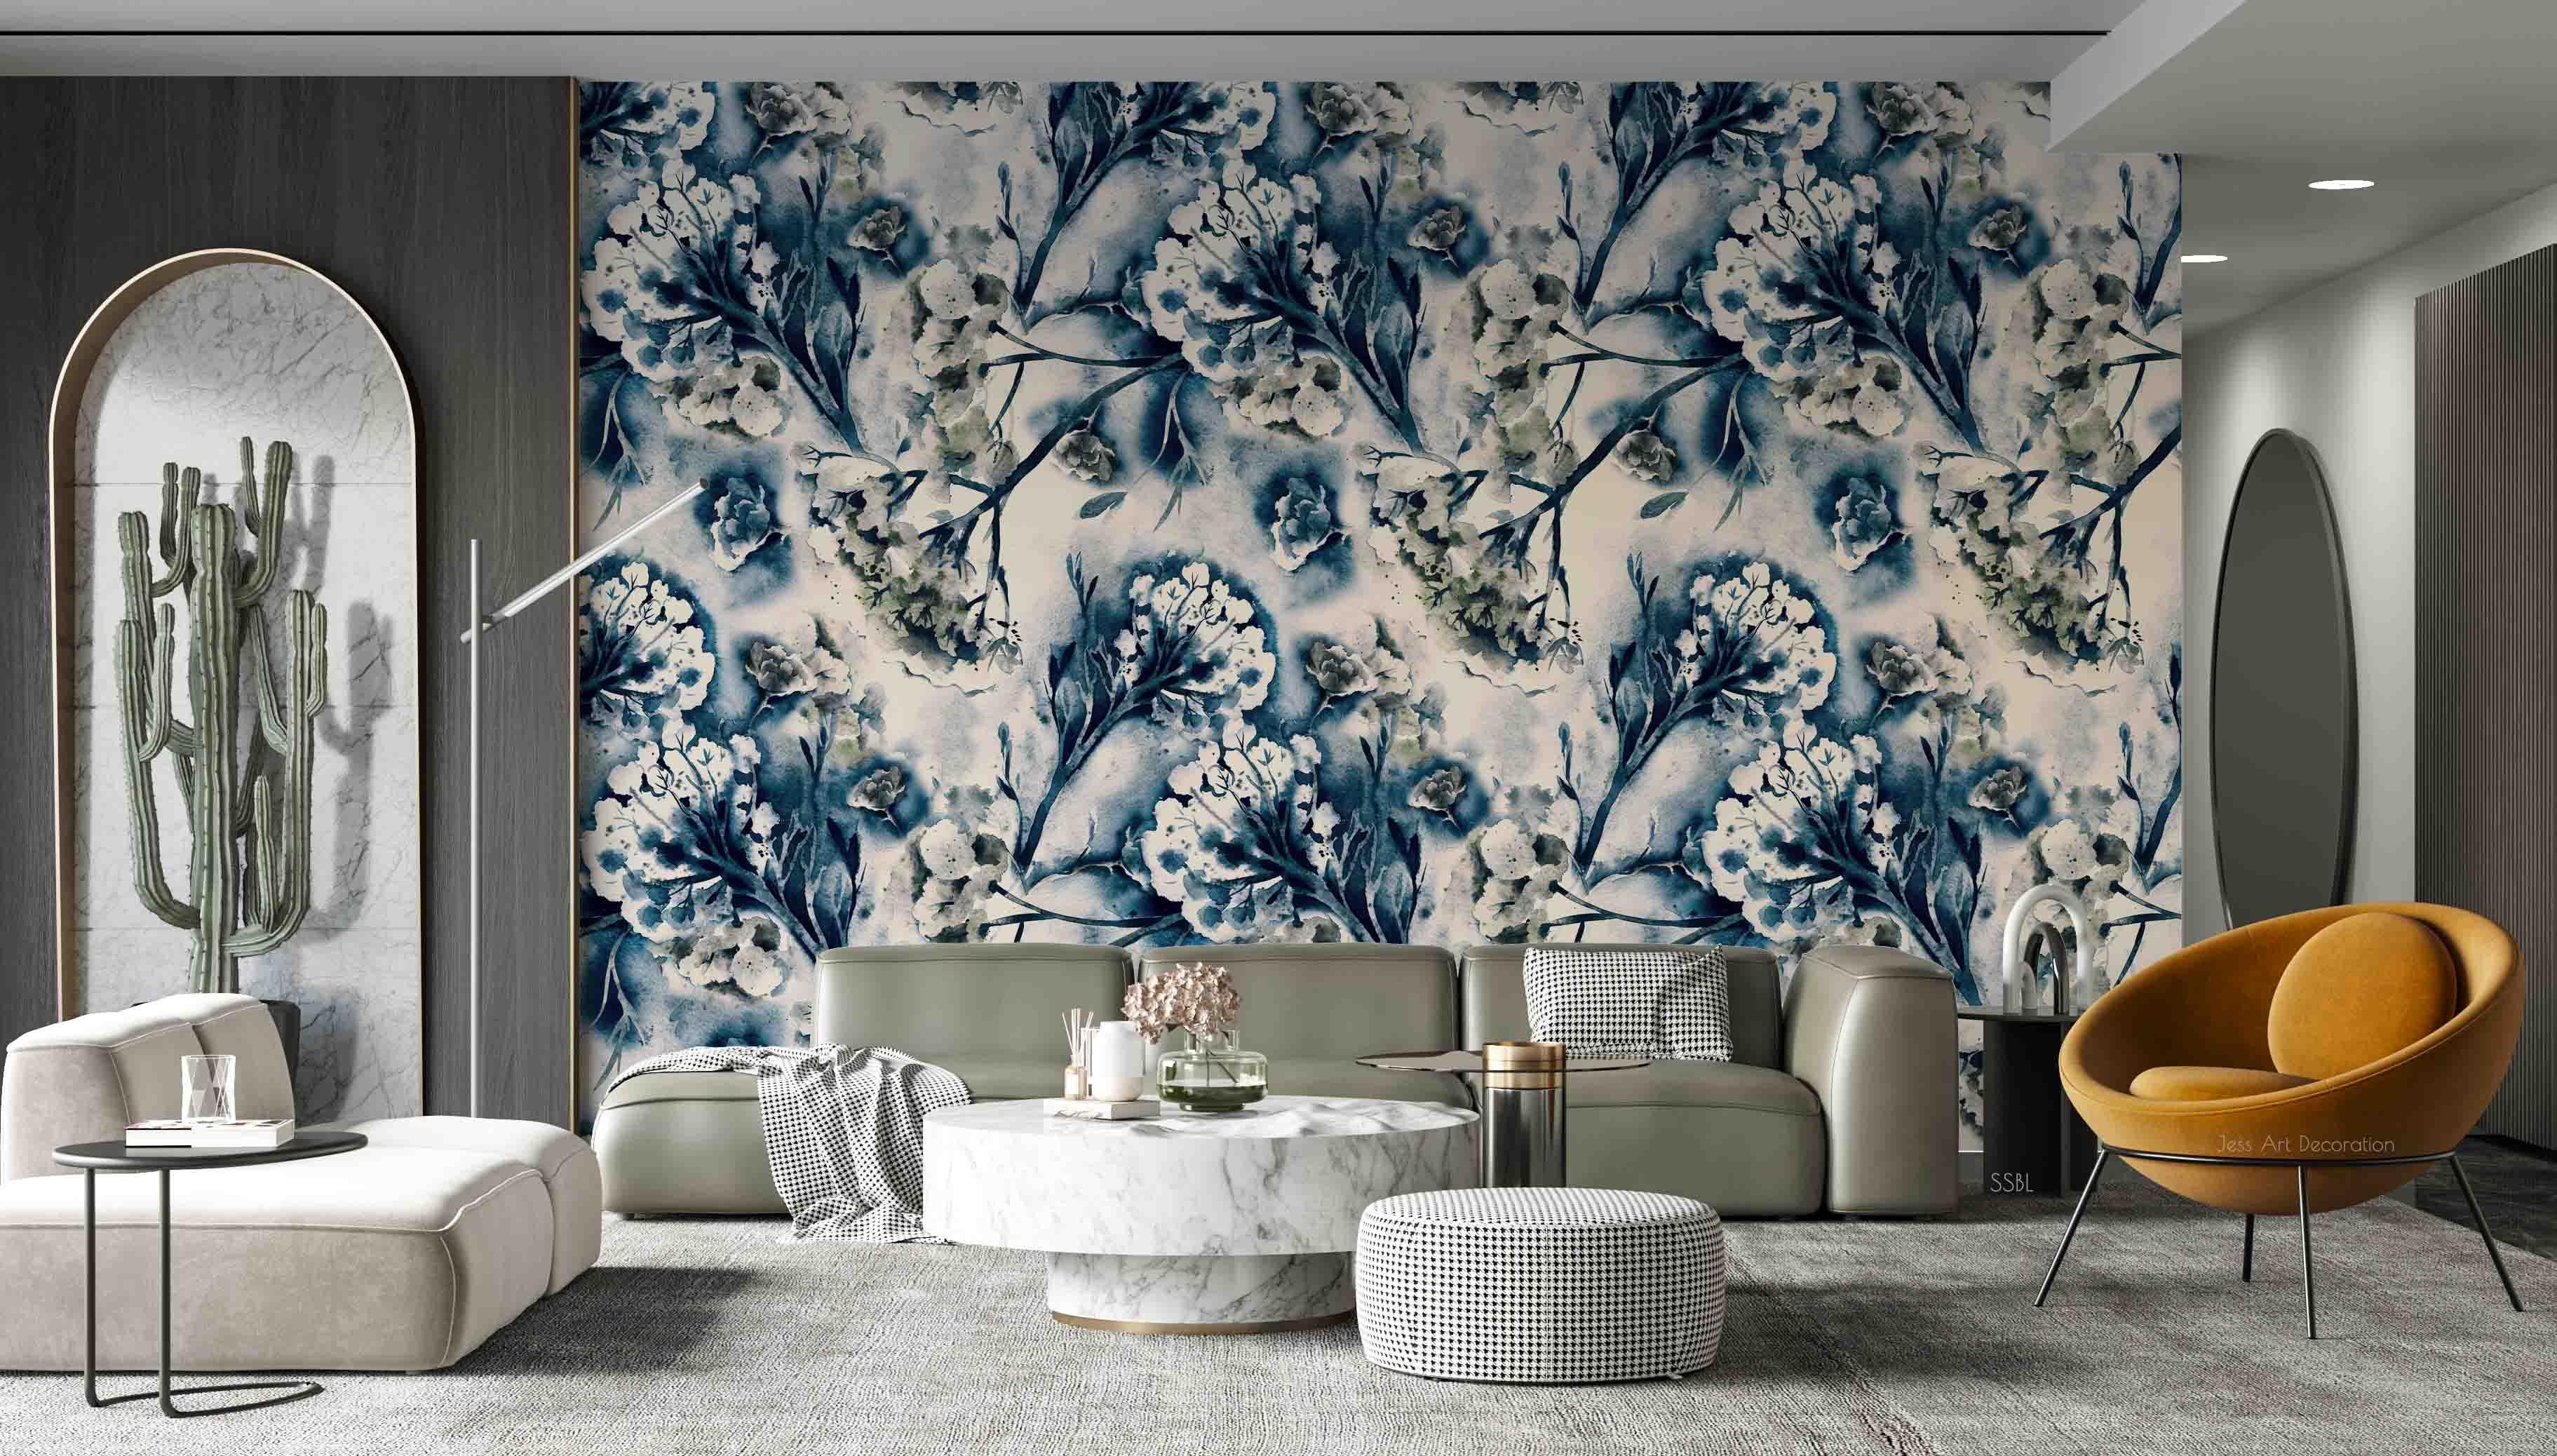 3D Vintage Baroque Art Blooming Peony Black Background Wall Mural Wallpaper GD 3638- Jess Art Decoration